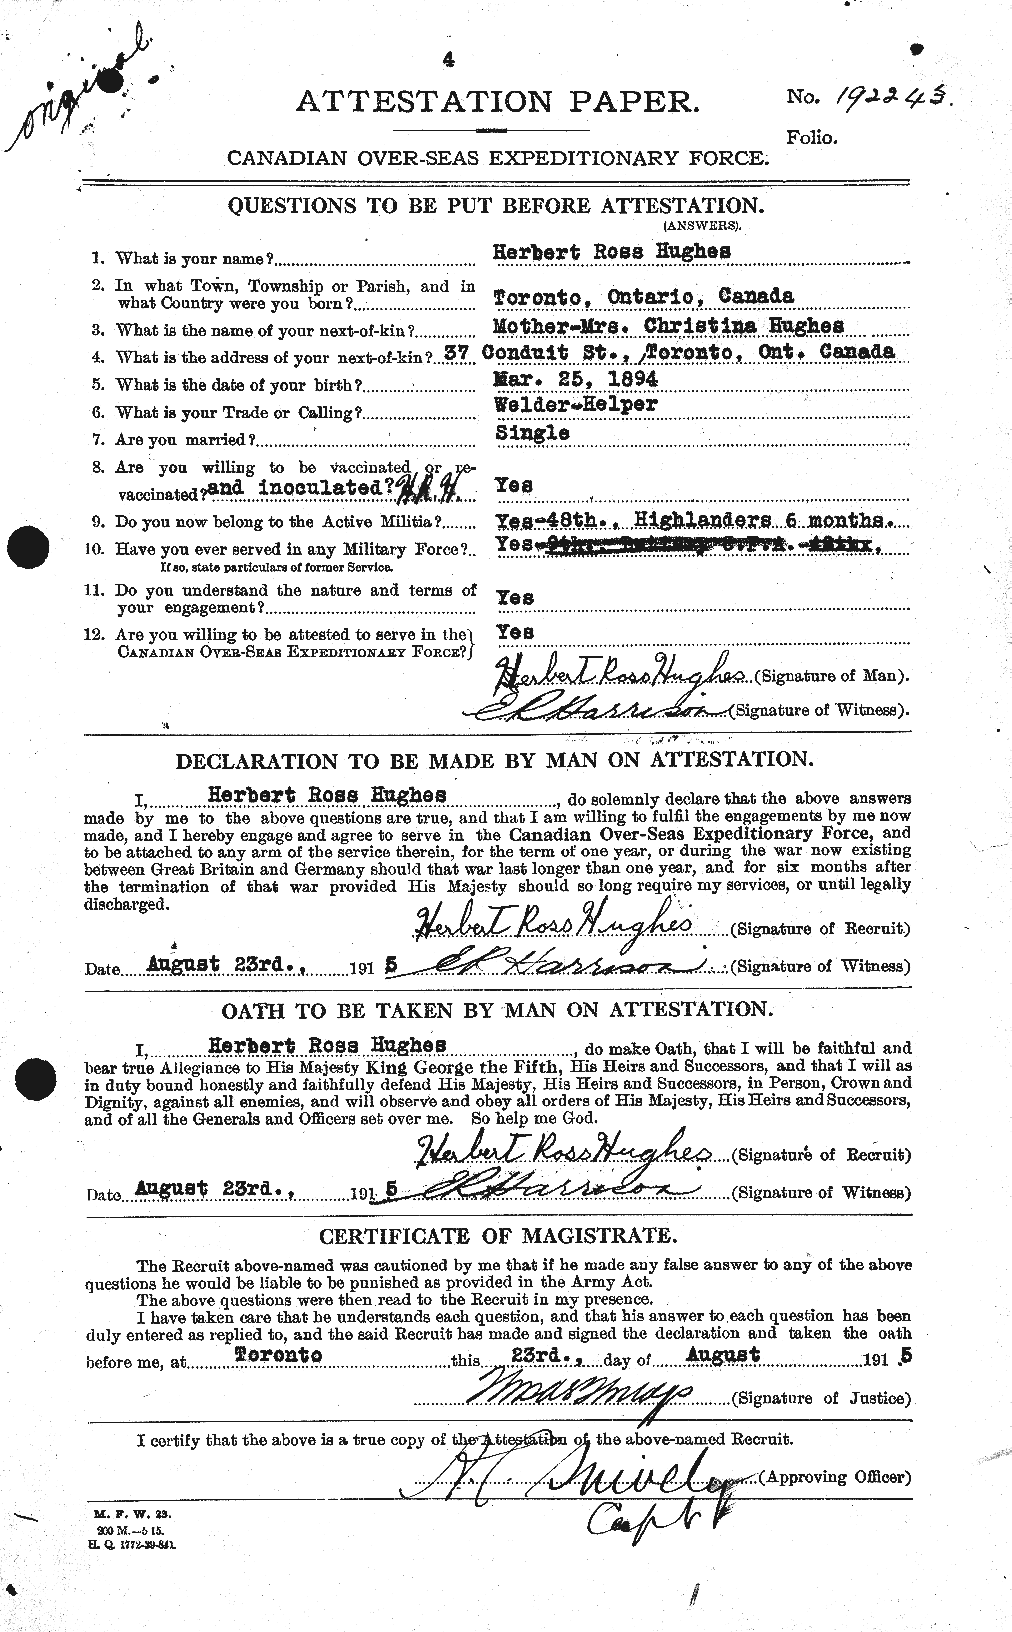 Personnel Records of the First World War - CEF 403904a